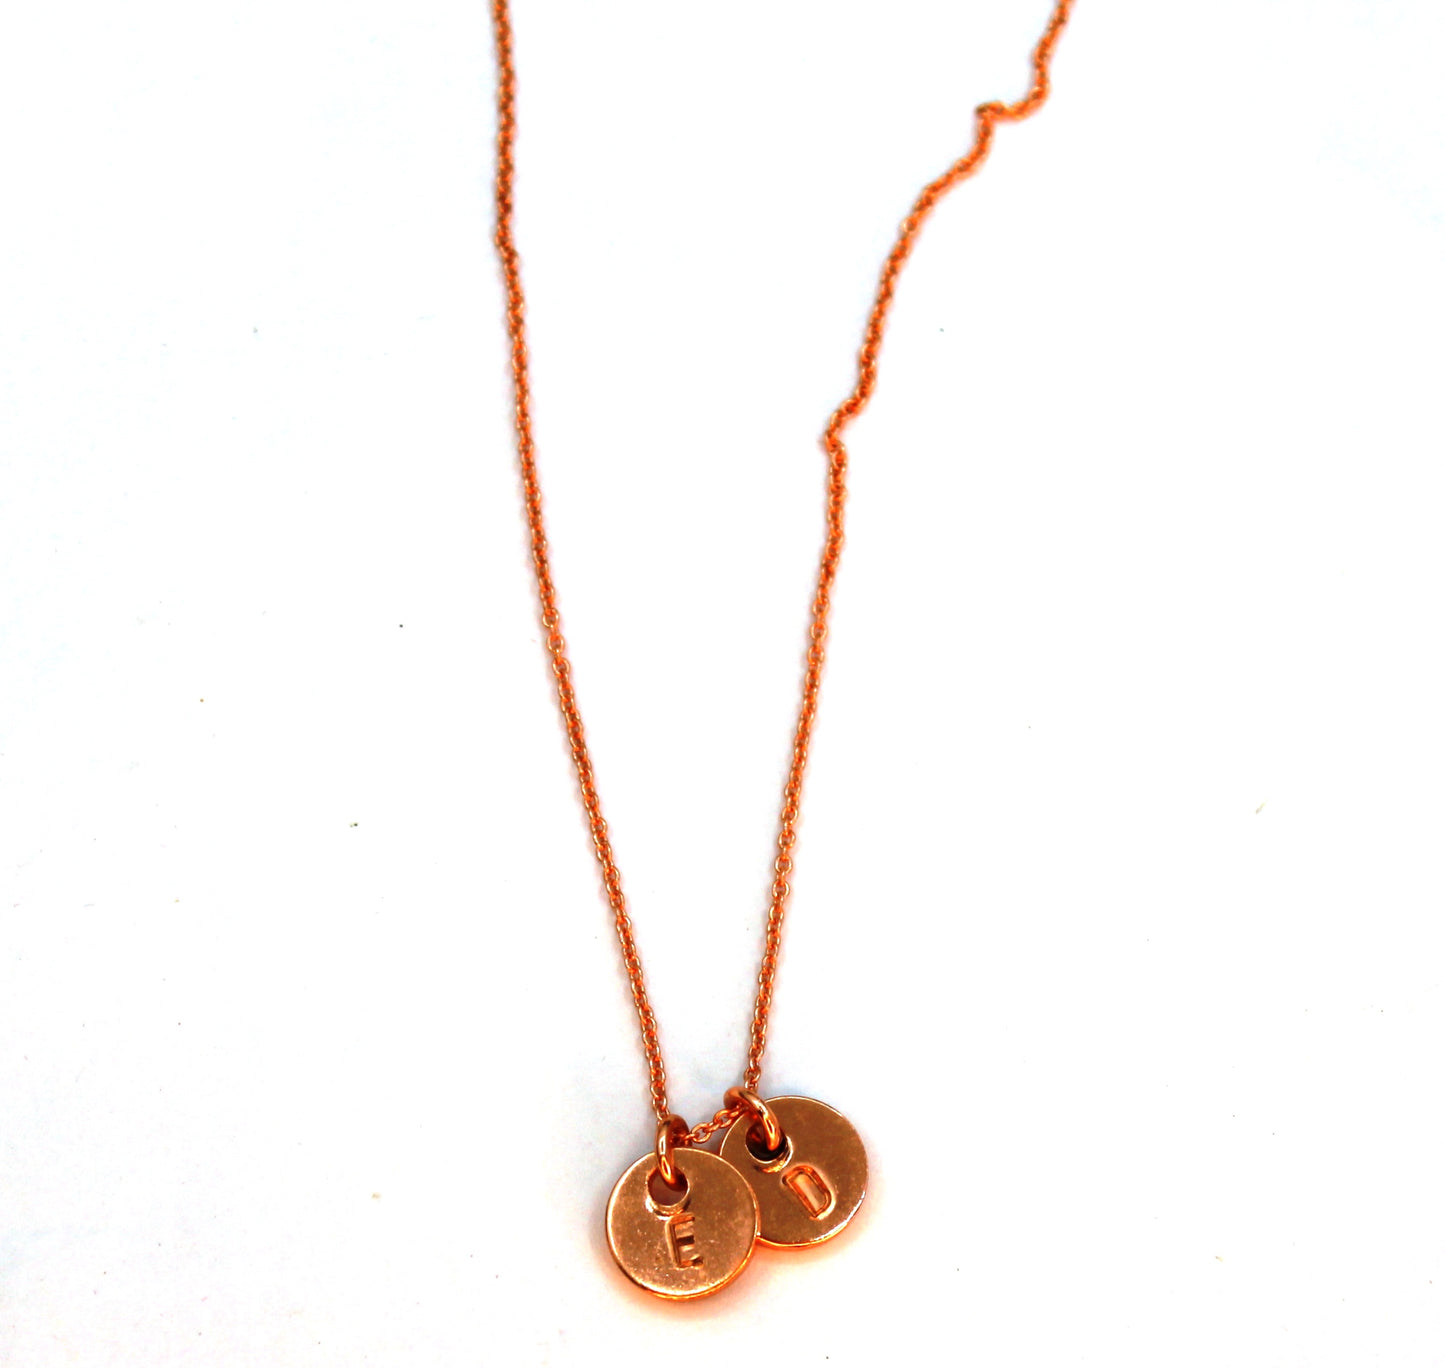 Create-Your-Own Delicate Initial Charm Necklace